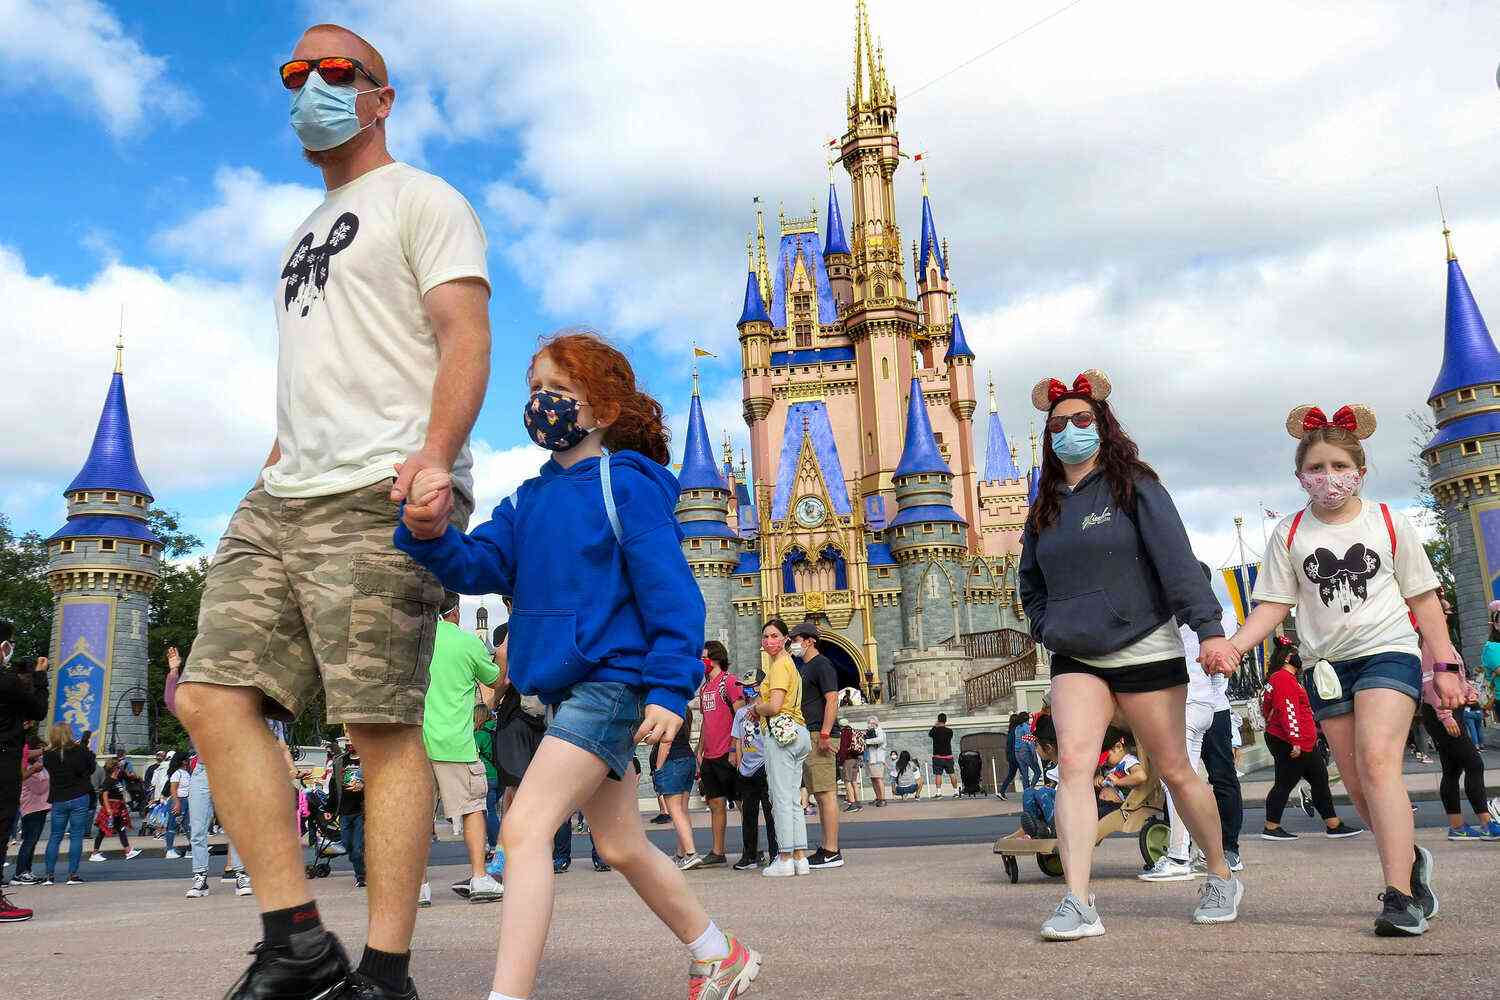 Disney waives anti-vaccination stance after Florida law clears governor's desk